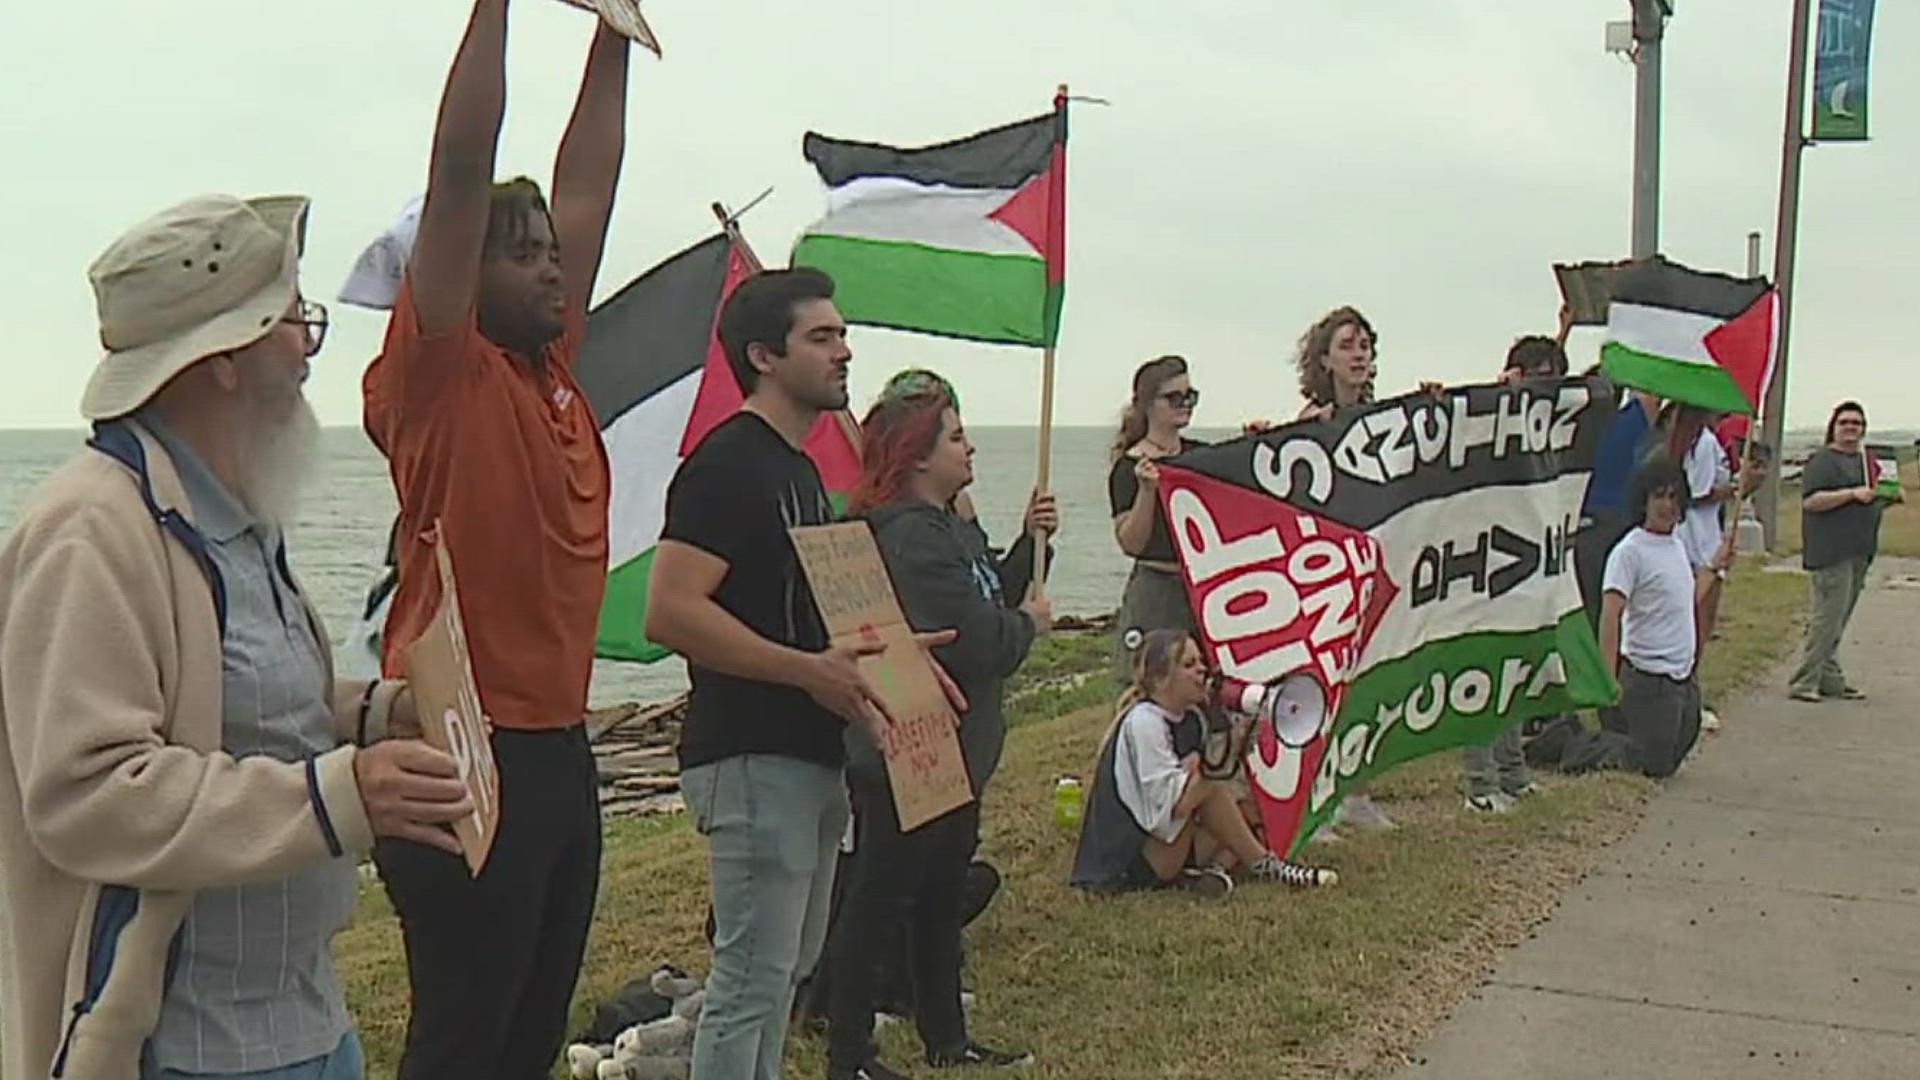 The students told 3NEWS they were there to bring attention to what has happened on other college campuses protesting the Israel-Palestinian war.